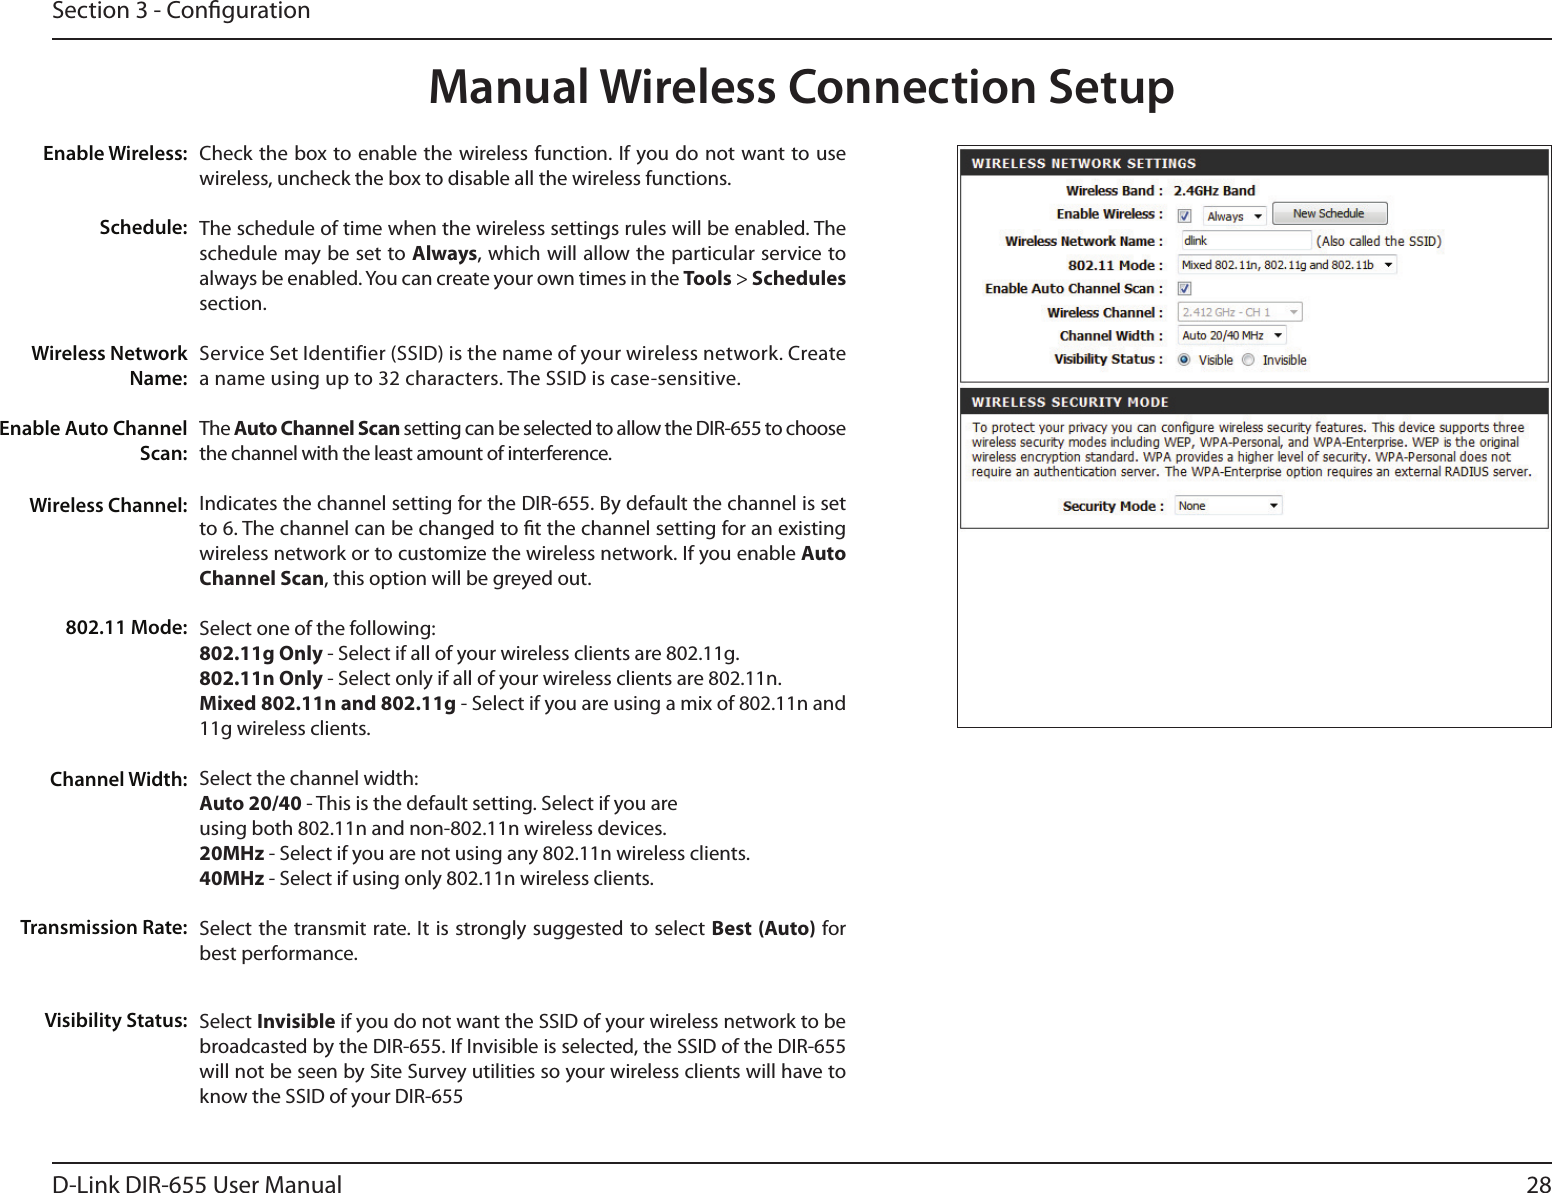 28D-Link DIR-655 User ManualSection 3 - CongurationCheck the box to enable the wireless function. If you do not  want to use wireless, uncheck the box to disable all the wireless functions.The schedule of time when the wireless settings rules will be enabled. The schedule may be set to Always, which will allow the particular service to always be enabled. You can create your own times in the Tools &gt; Schedules section.Service Set Identifier (SSID) is the name of your wireless network. Create a name using up to 32 characters. The SSID is case-sensitive.The Auto Channel Scan setting can be selected to allow the DIR-655 to choose the channel with the least amount of interference.Indicates the channel setting for the DIR-655. By default the channel is set to 6. The channel can be changed to t the channel setting for an existing wireless network or to customize the wireless network. If you enable Auto Channel Scan, this option will be greyed out.Select one of the following:802.11g Only - Select if all of your wireless clients are 802.11g.802.11n Only - Select only if all of your wireless clients are 802.11n.Mixed 802.11n and 802.11g - Select if you are using a mix of 802.11n and 11g wireless clients.Select the channel width:Auto 20/40 - This is the default setting. Select if you are using both 802.11n and non-802.11n wireless devices.20MHz - Select if you are not using any 802.11n wireless clients.40MHz - Select if using only 802.11n wireless clients.Select the transmit rate. It is strongly suggested to select Best (Auto) for best performance.Select Invisible if you do not want the SSID of your wireless network to be broadcasted by the DIR-655. If Invisible is selected, the SSID of the DIR-655 will not be seen by Site Survey utilities so your wireless clients will have to know the SSID of your DIR-655Enable Wireless:Enable Auto Channel Scan:Manual Wireless Connection SetupWireless Network Name:Wireless Channel:802.11 Mode:Channel Width:Transmission Rate:Visibility Status:Schedule: